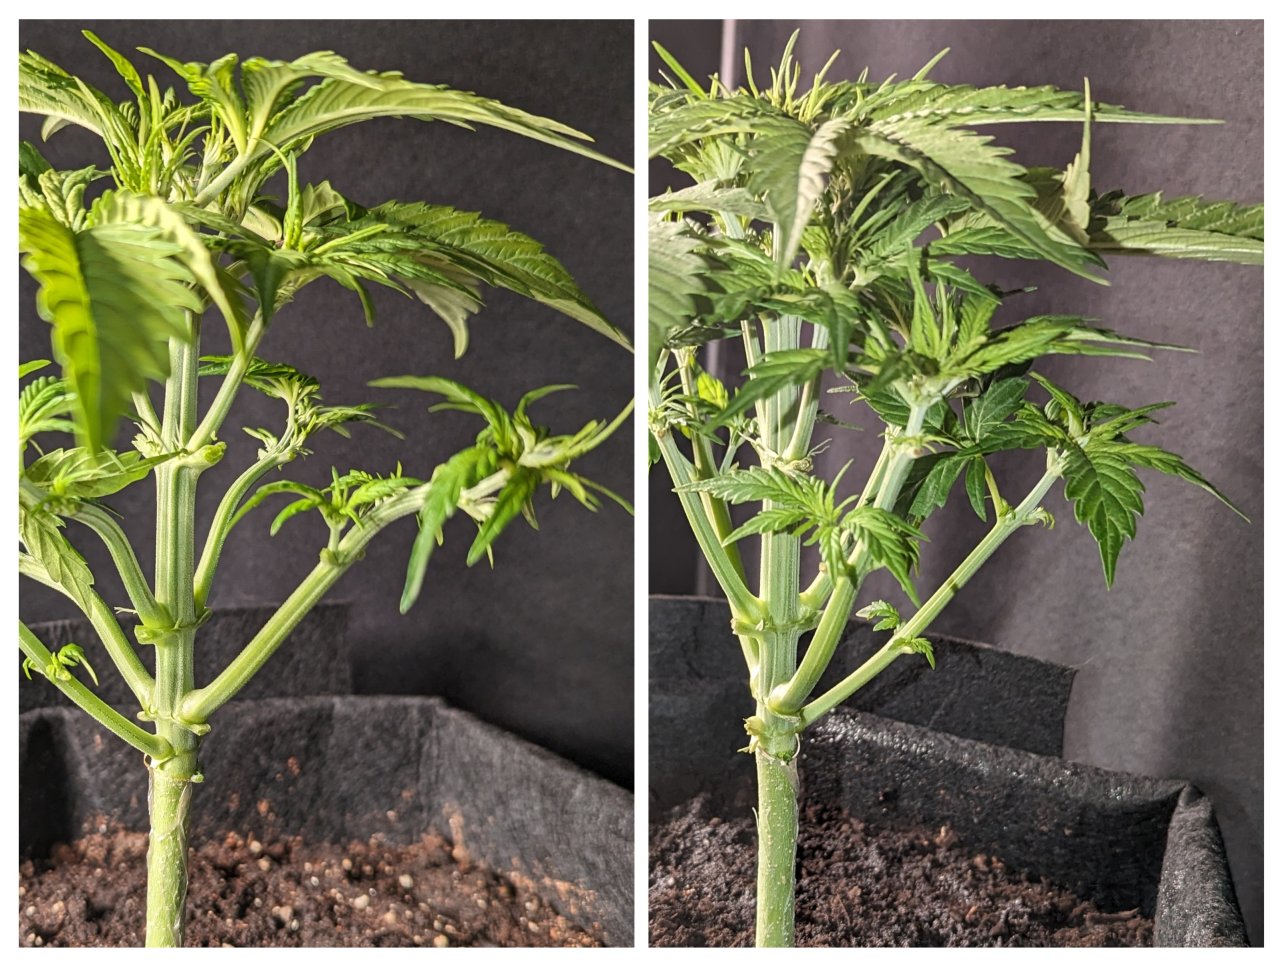 Carmella (Dosidos auto by Royal Queen), 11/09/23 – day 23 (left) & 11/10/23 – day 24 (right)